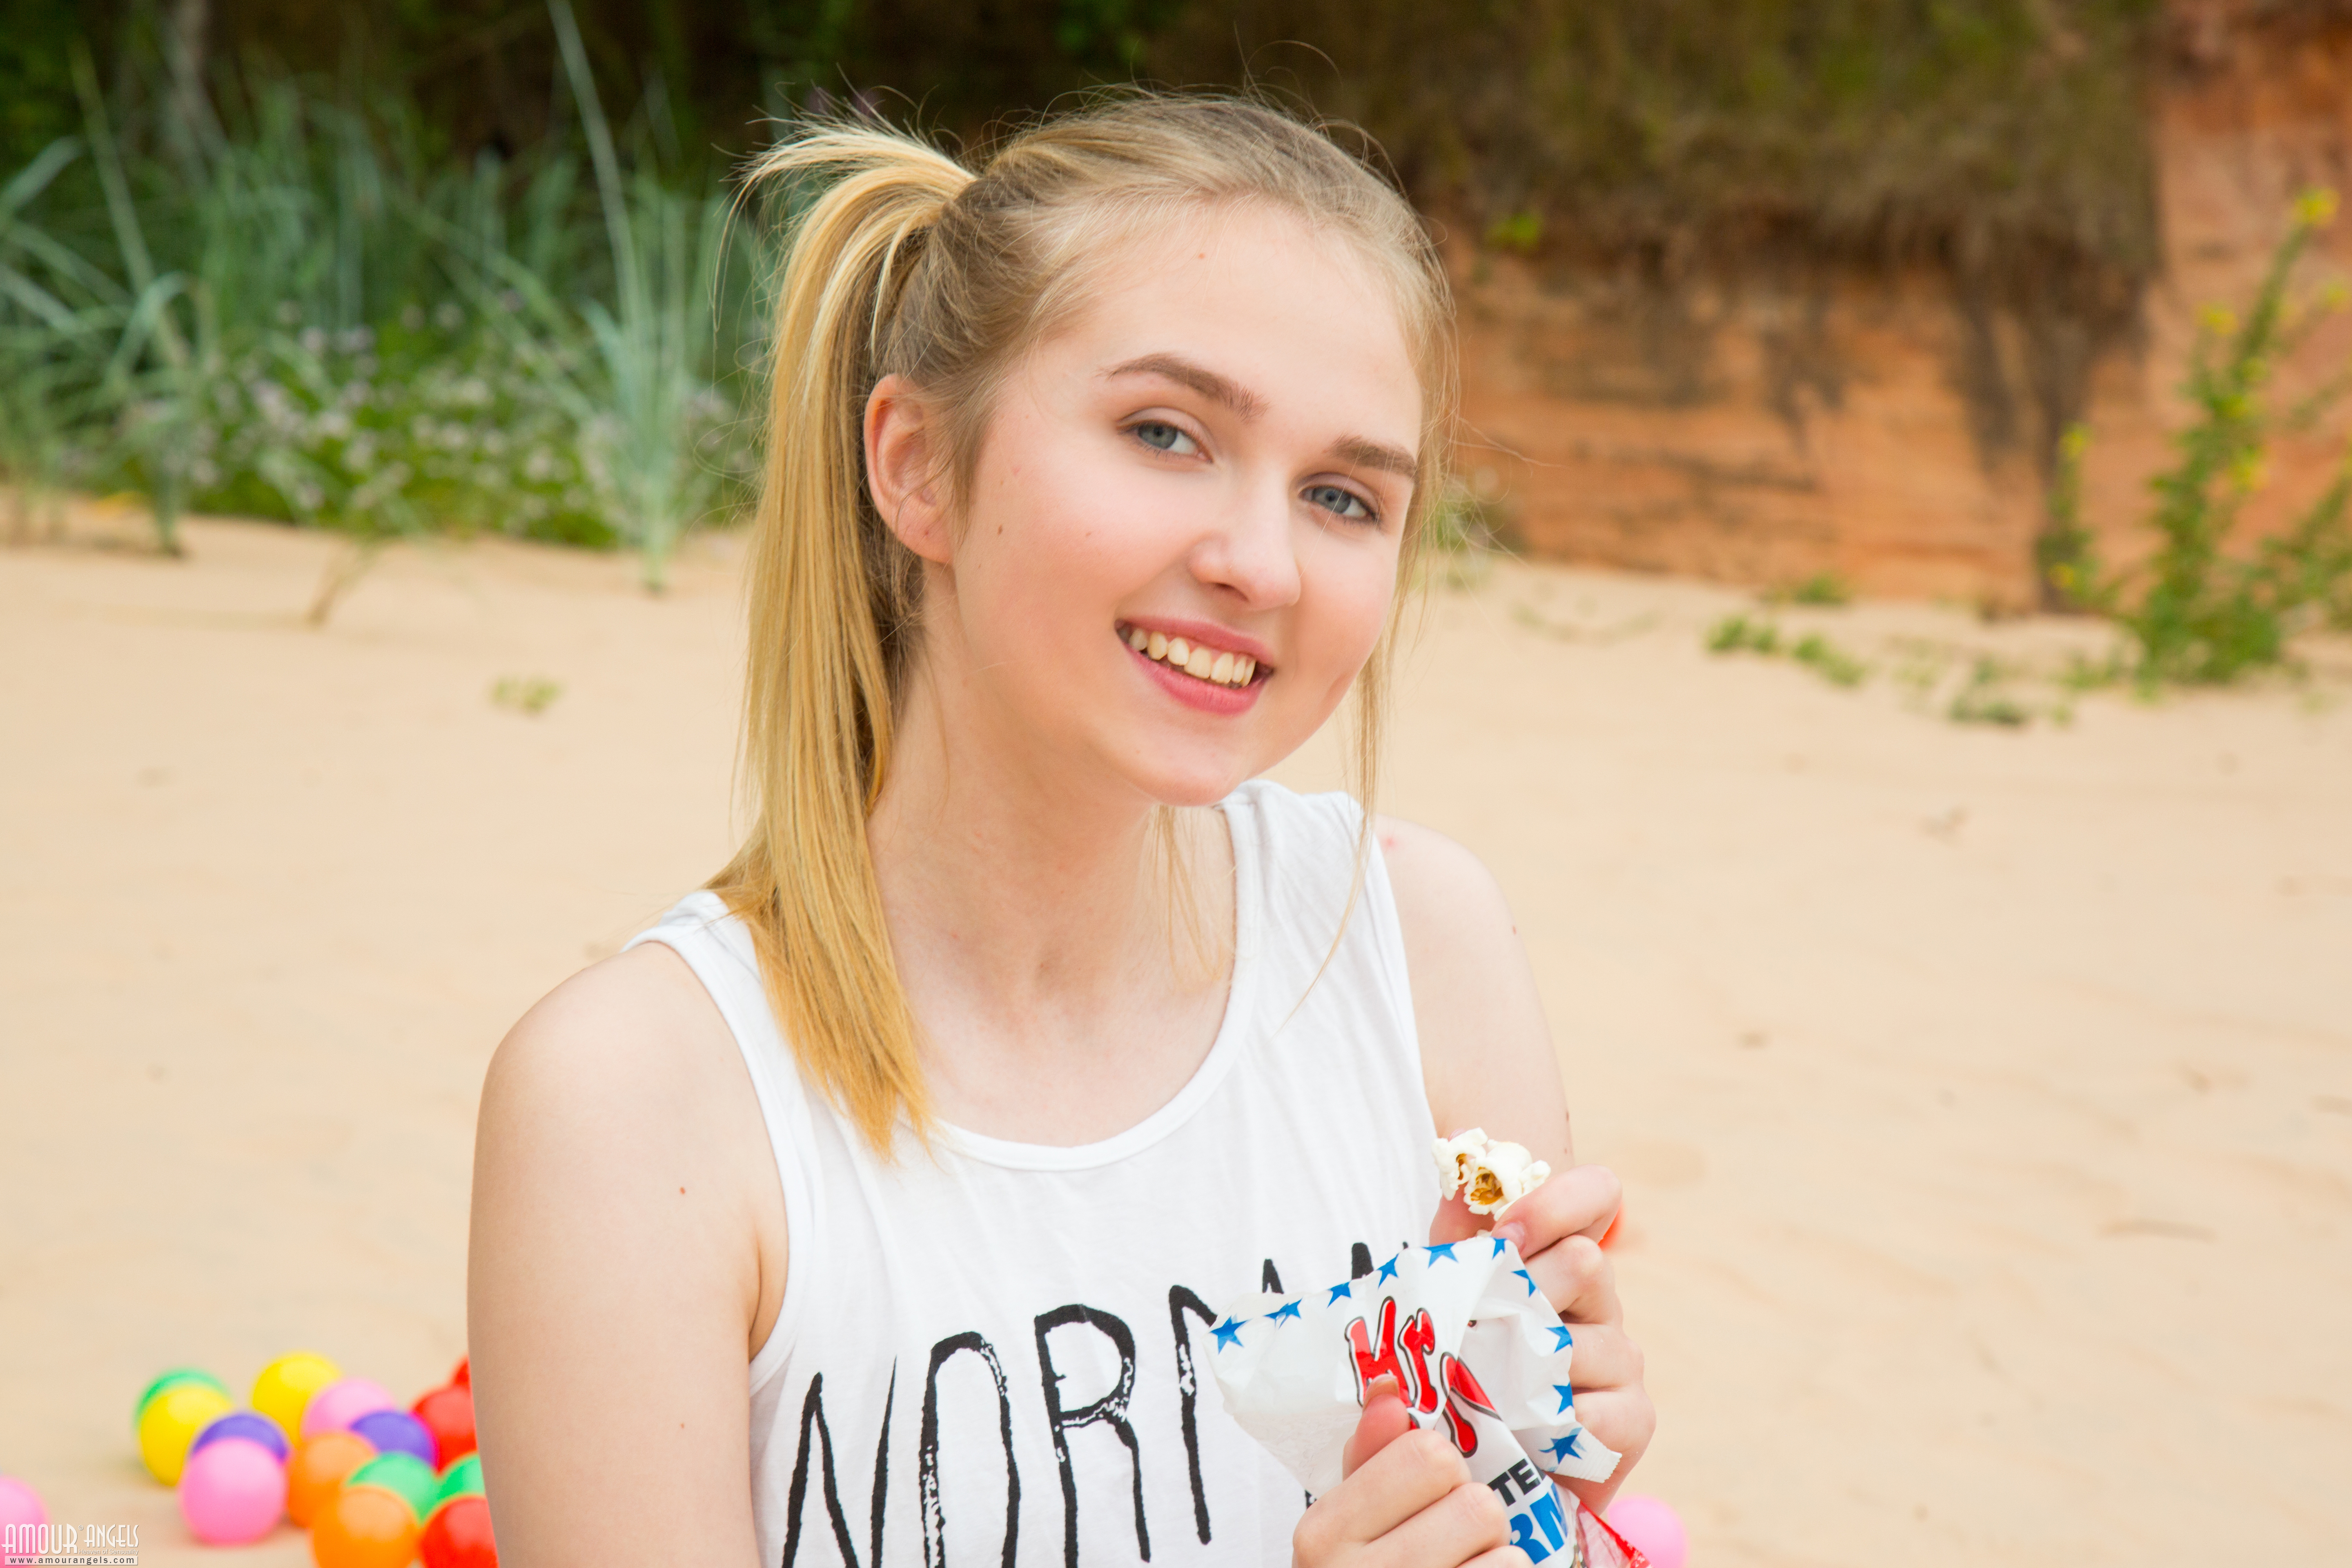 People 5760x3840 Nimfa Amour Angels small boobs blonde beach smiling women closeup watermarked